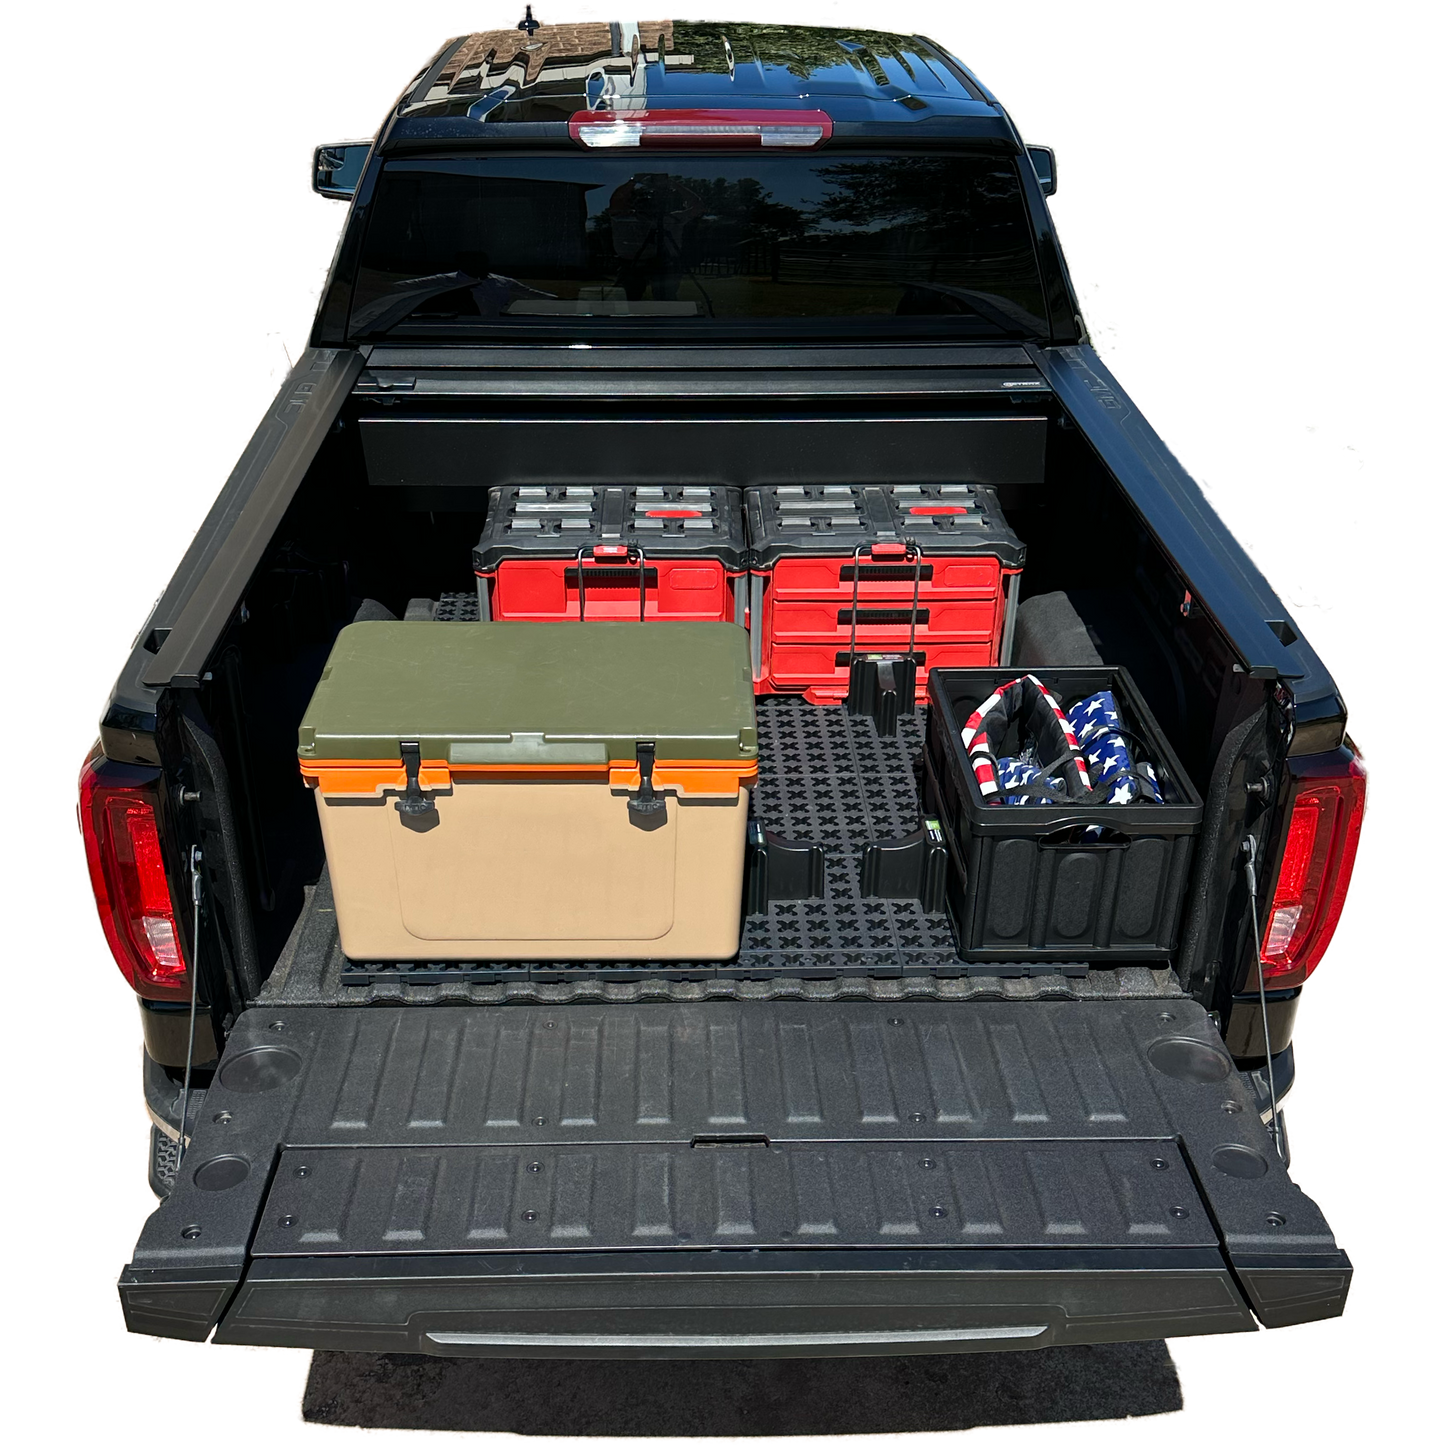 Tmat Truck Bed Organizer Slide Out Mat | Universal Fit for Long Beds 8' to 8'2"